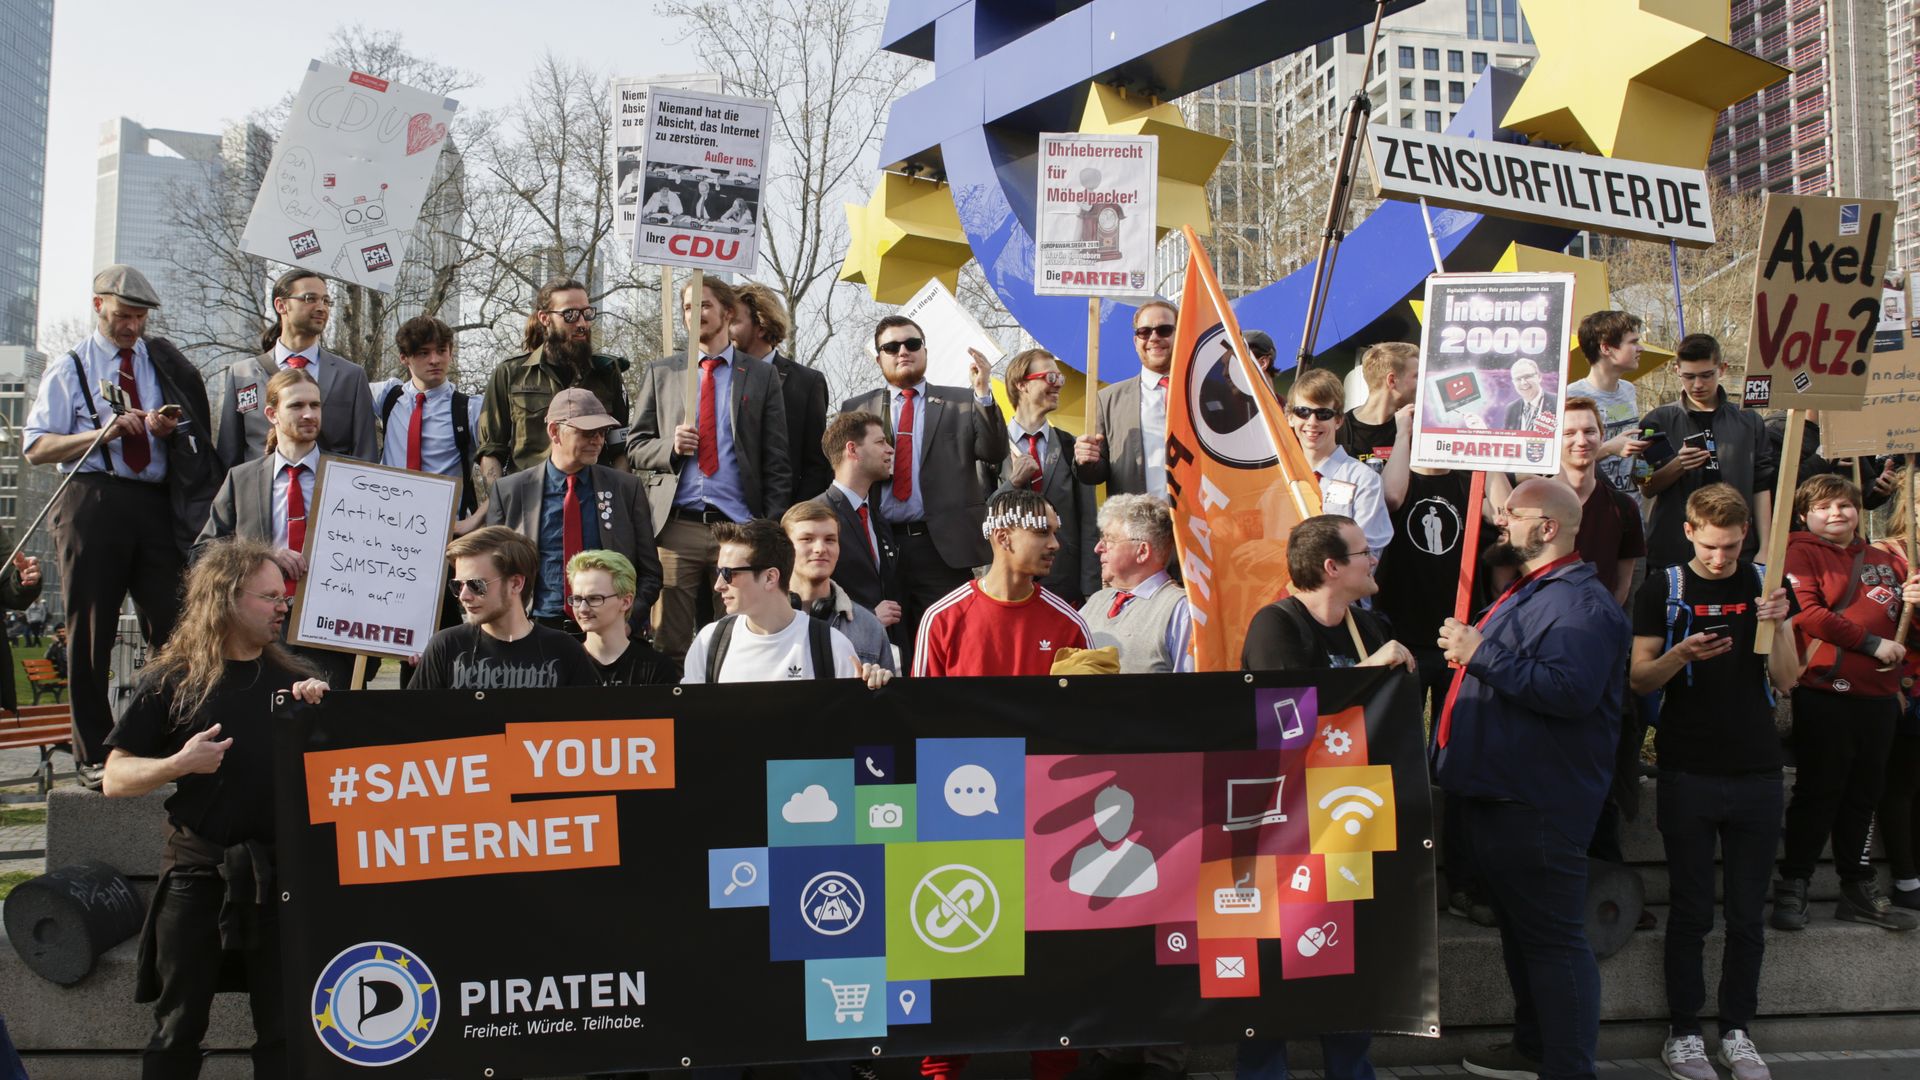 Protesters in Europe carry signs opposing EU copyright rules